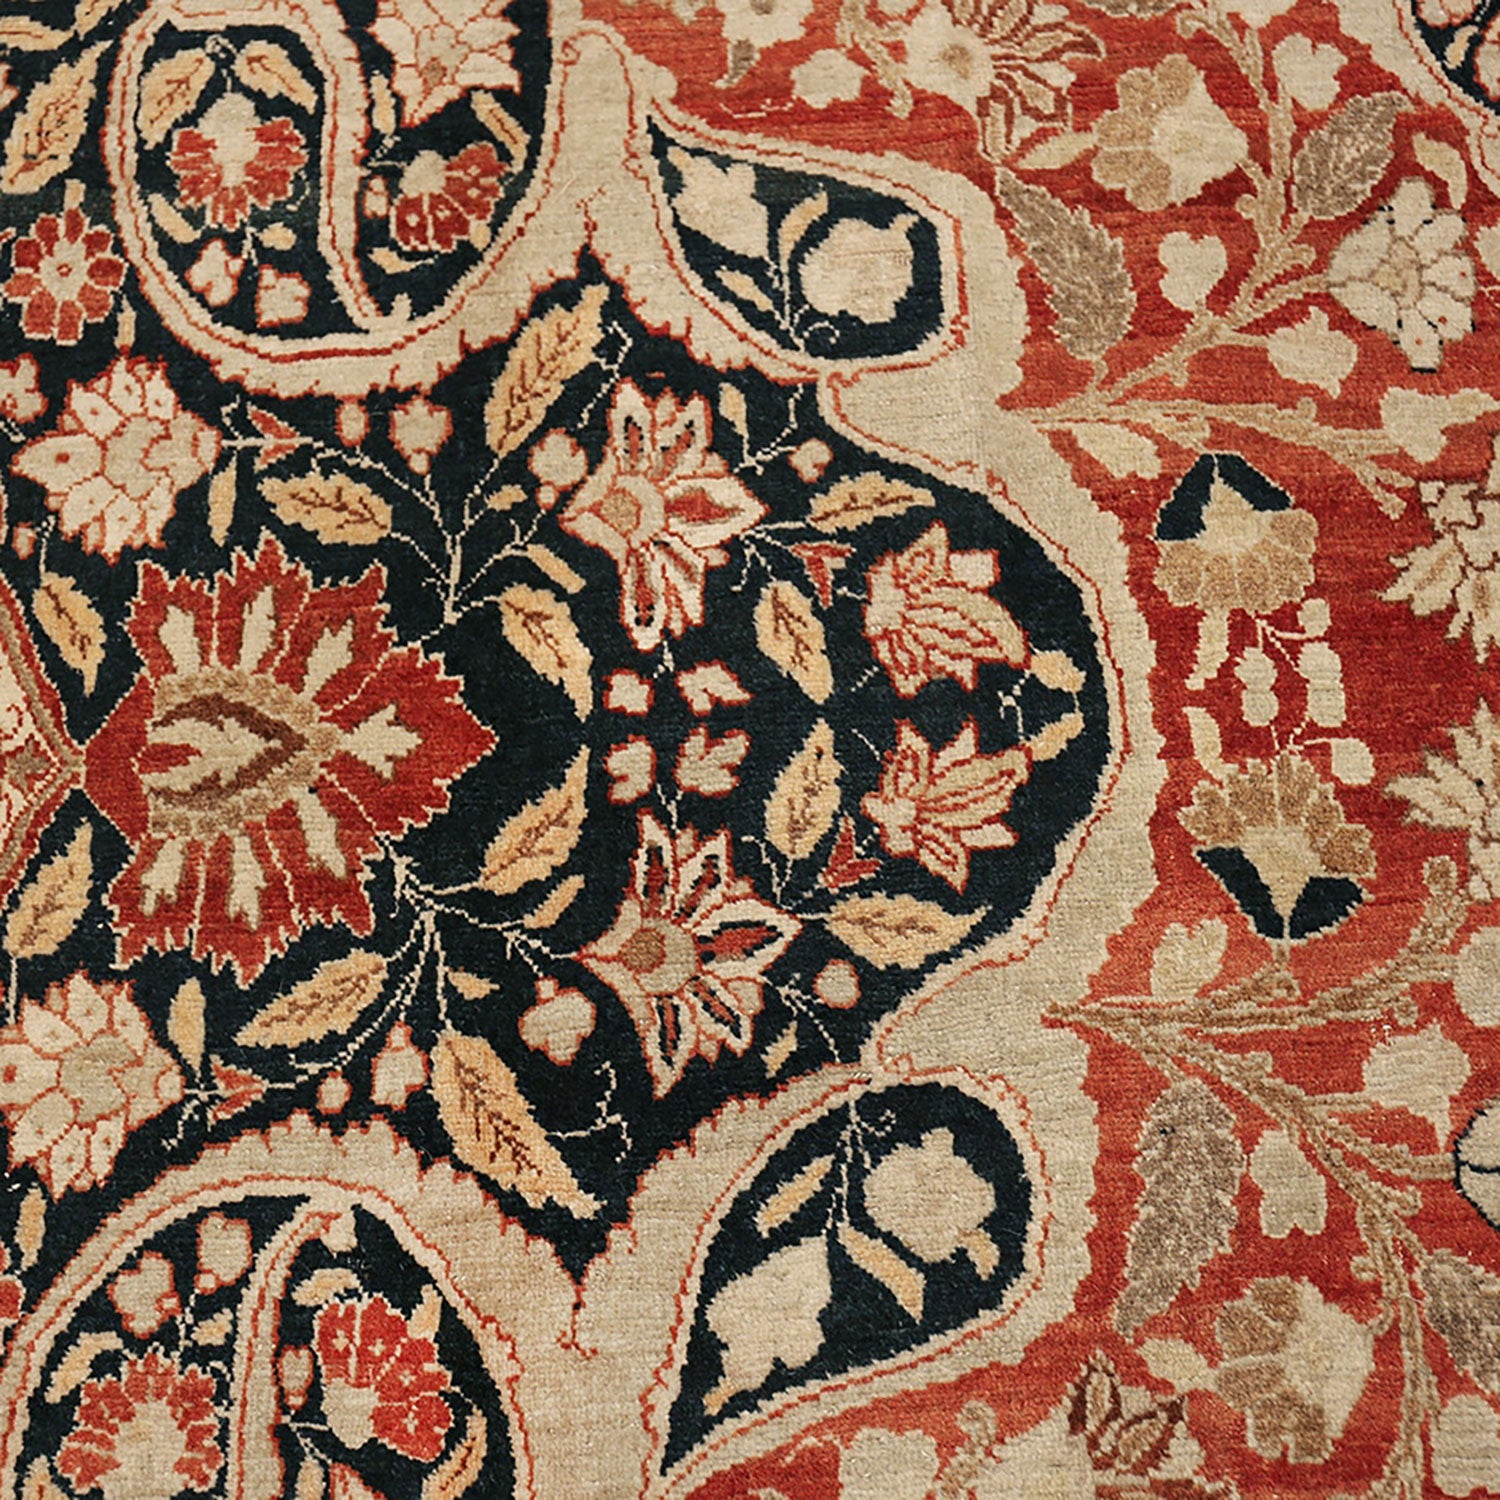 Intricate floral motifs adorn a high-quality, hand-knotted Persian carpet.